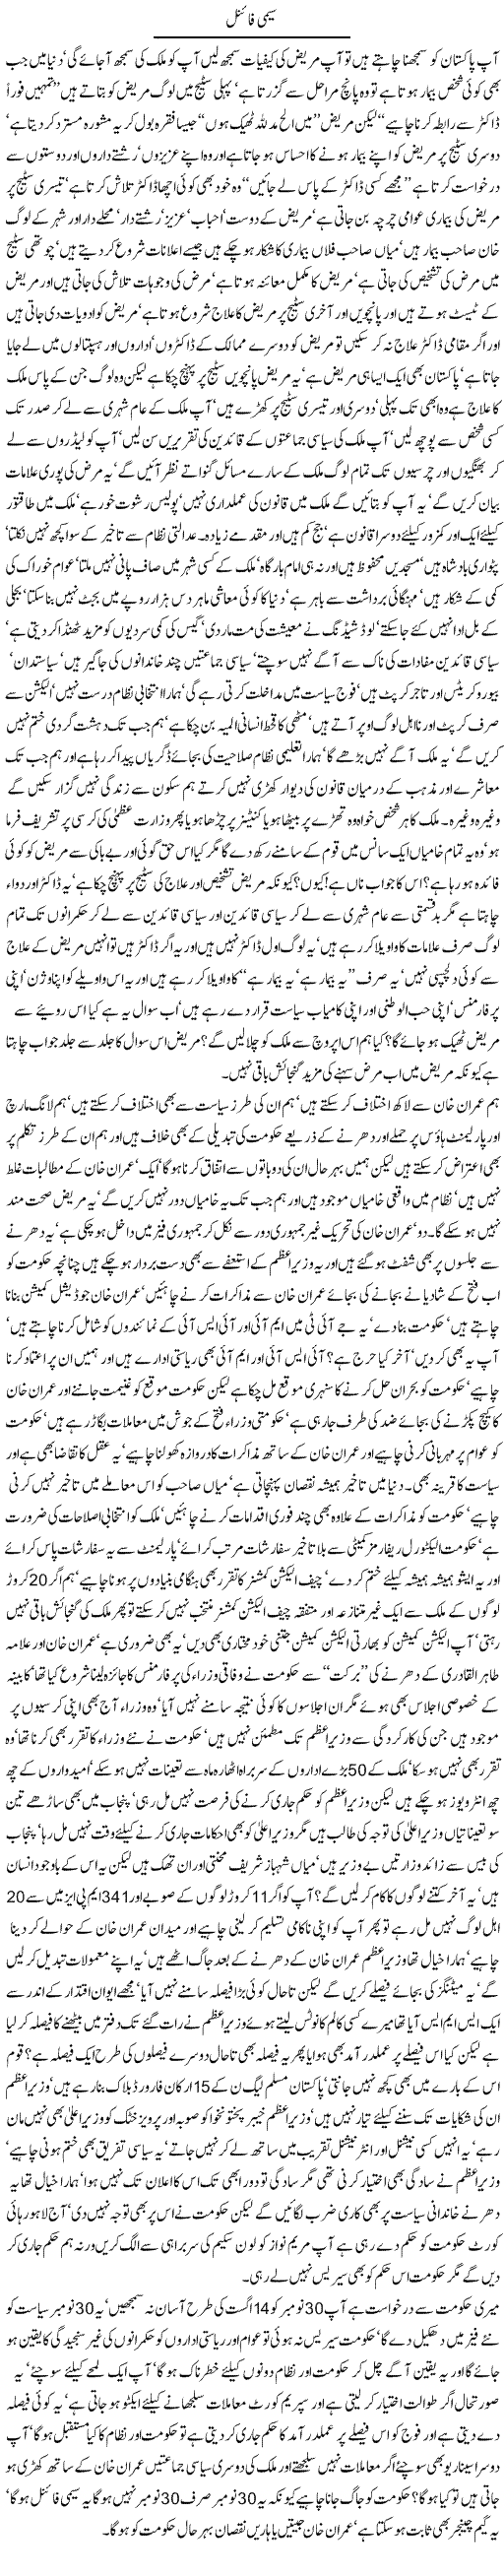 Semi Final by Javed Chaudhry